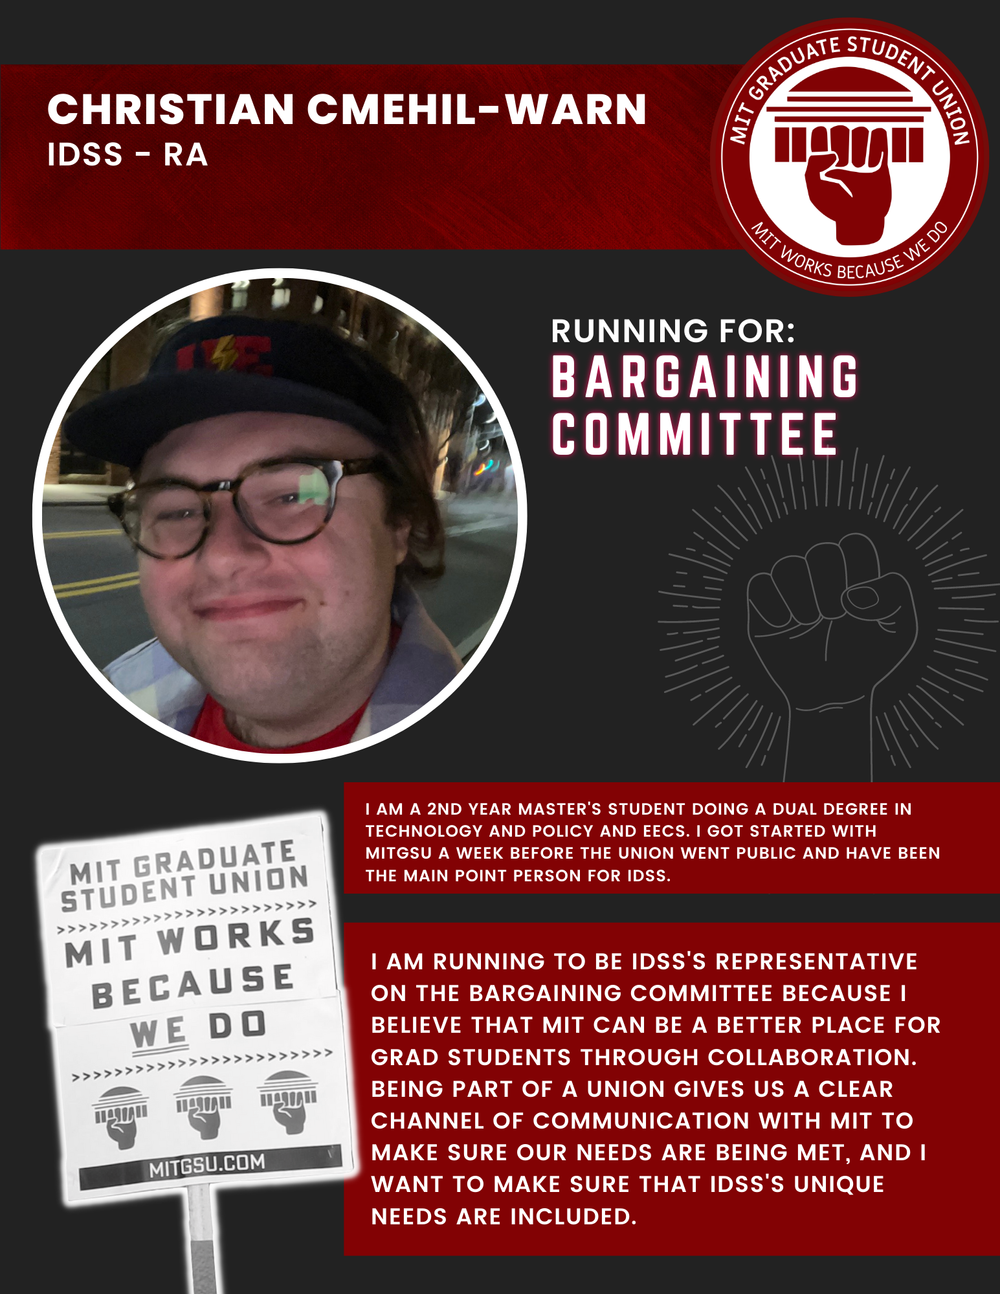  CHRISTIAN CMEHIL-WARN IDSS - RA   RUNNING FOR: Bargaining Committee  I AM A 2ND YEAR MASTER'S STUDENT DOING A DUAL DEGREE IN TECHNOLOGY AND POLICY AND EECS. I GOT STARTED WITH MITGSU A WEEK BEFORE THE UNION WENT PUBLIC AND HAVE BEEN THE MAIN POINT P